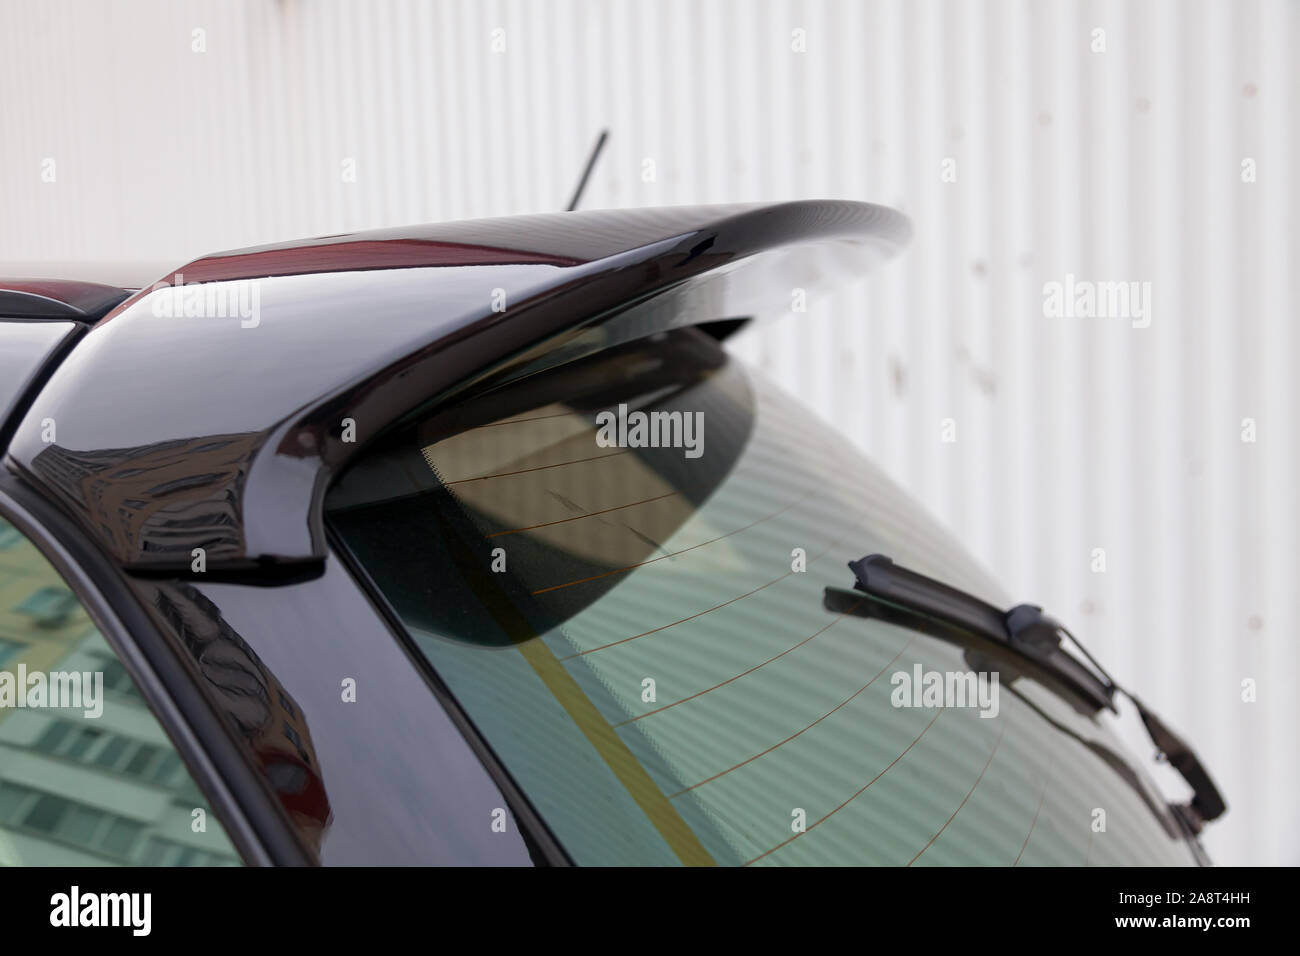 View of the trunk lid of a black car with a plastic spoiler over the rear window to improve the aerodynamics of the vehicle body during tuning for rac Stock Photo